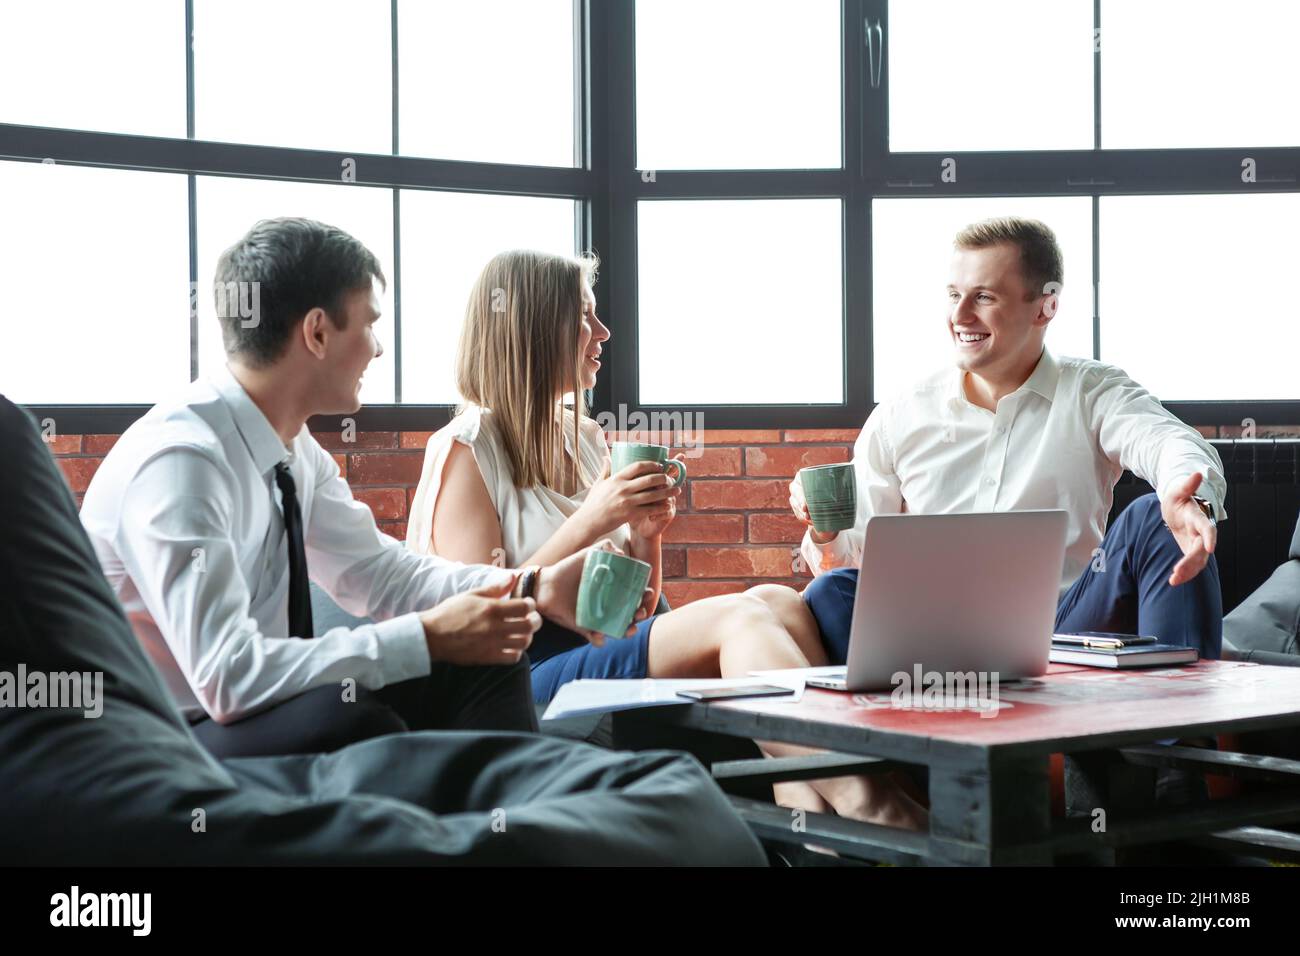 A Group of young friends having fun in an informal atmosphere. Stock Photo